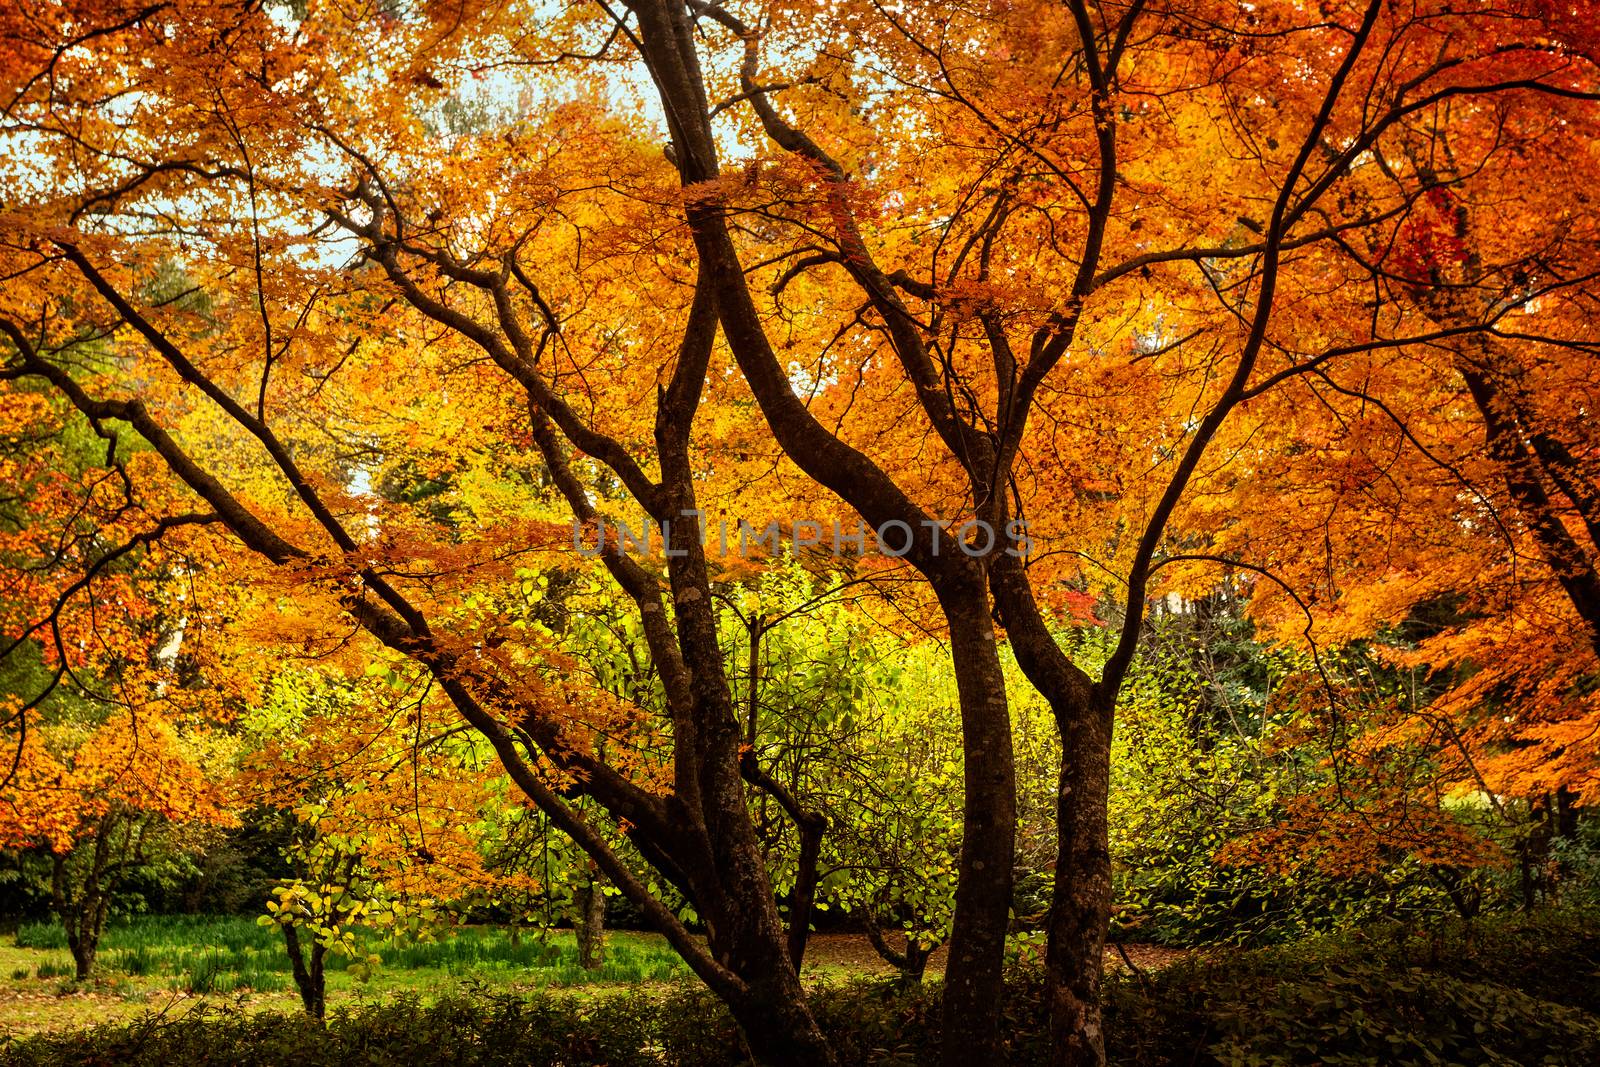 Autumn trees vibrant with colour by lovleah